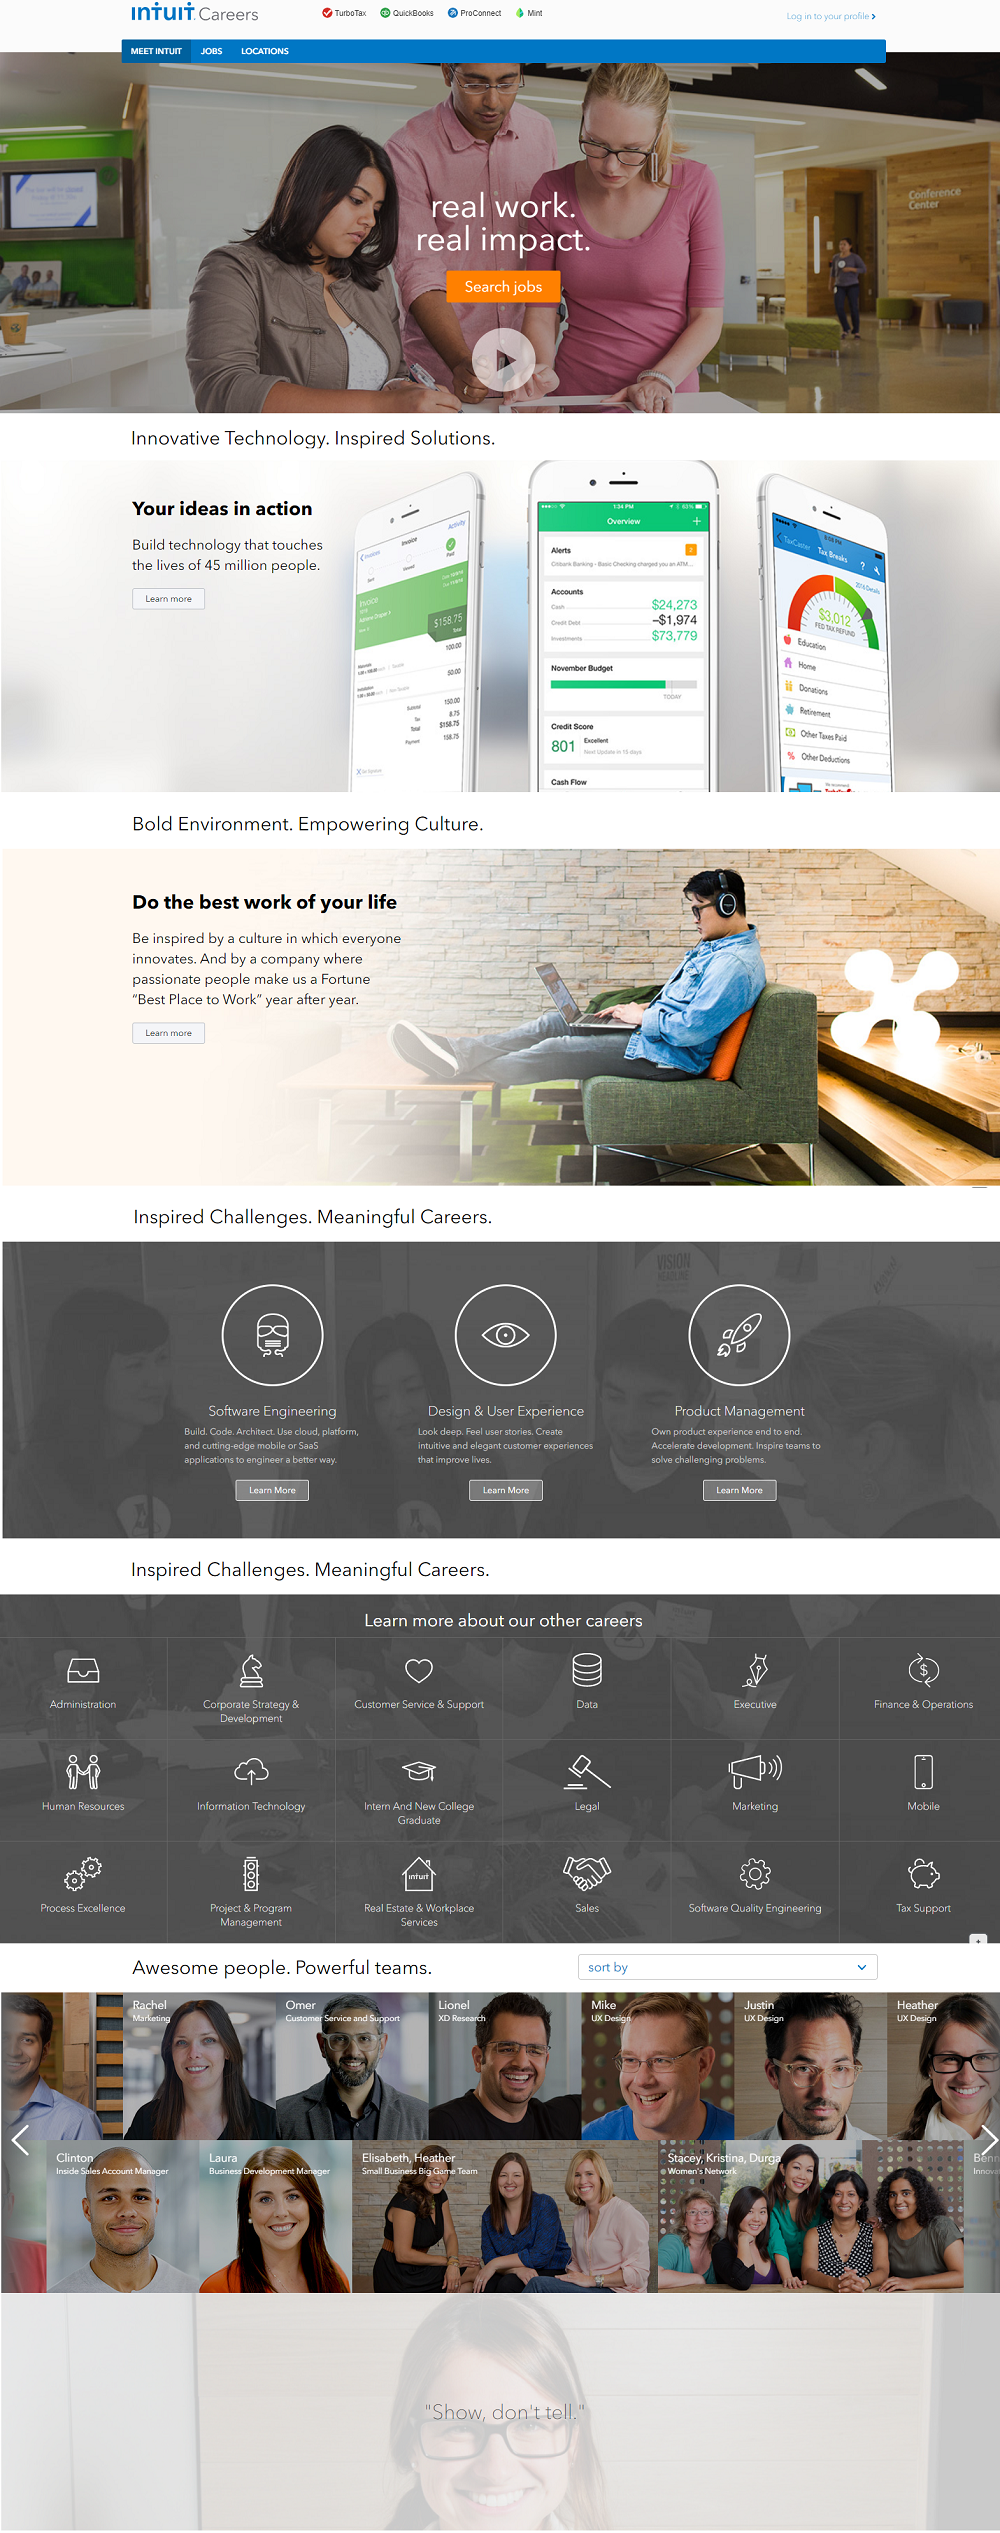  Intuit Company Career Page